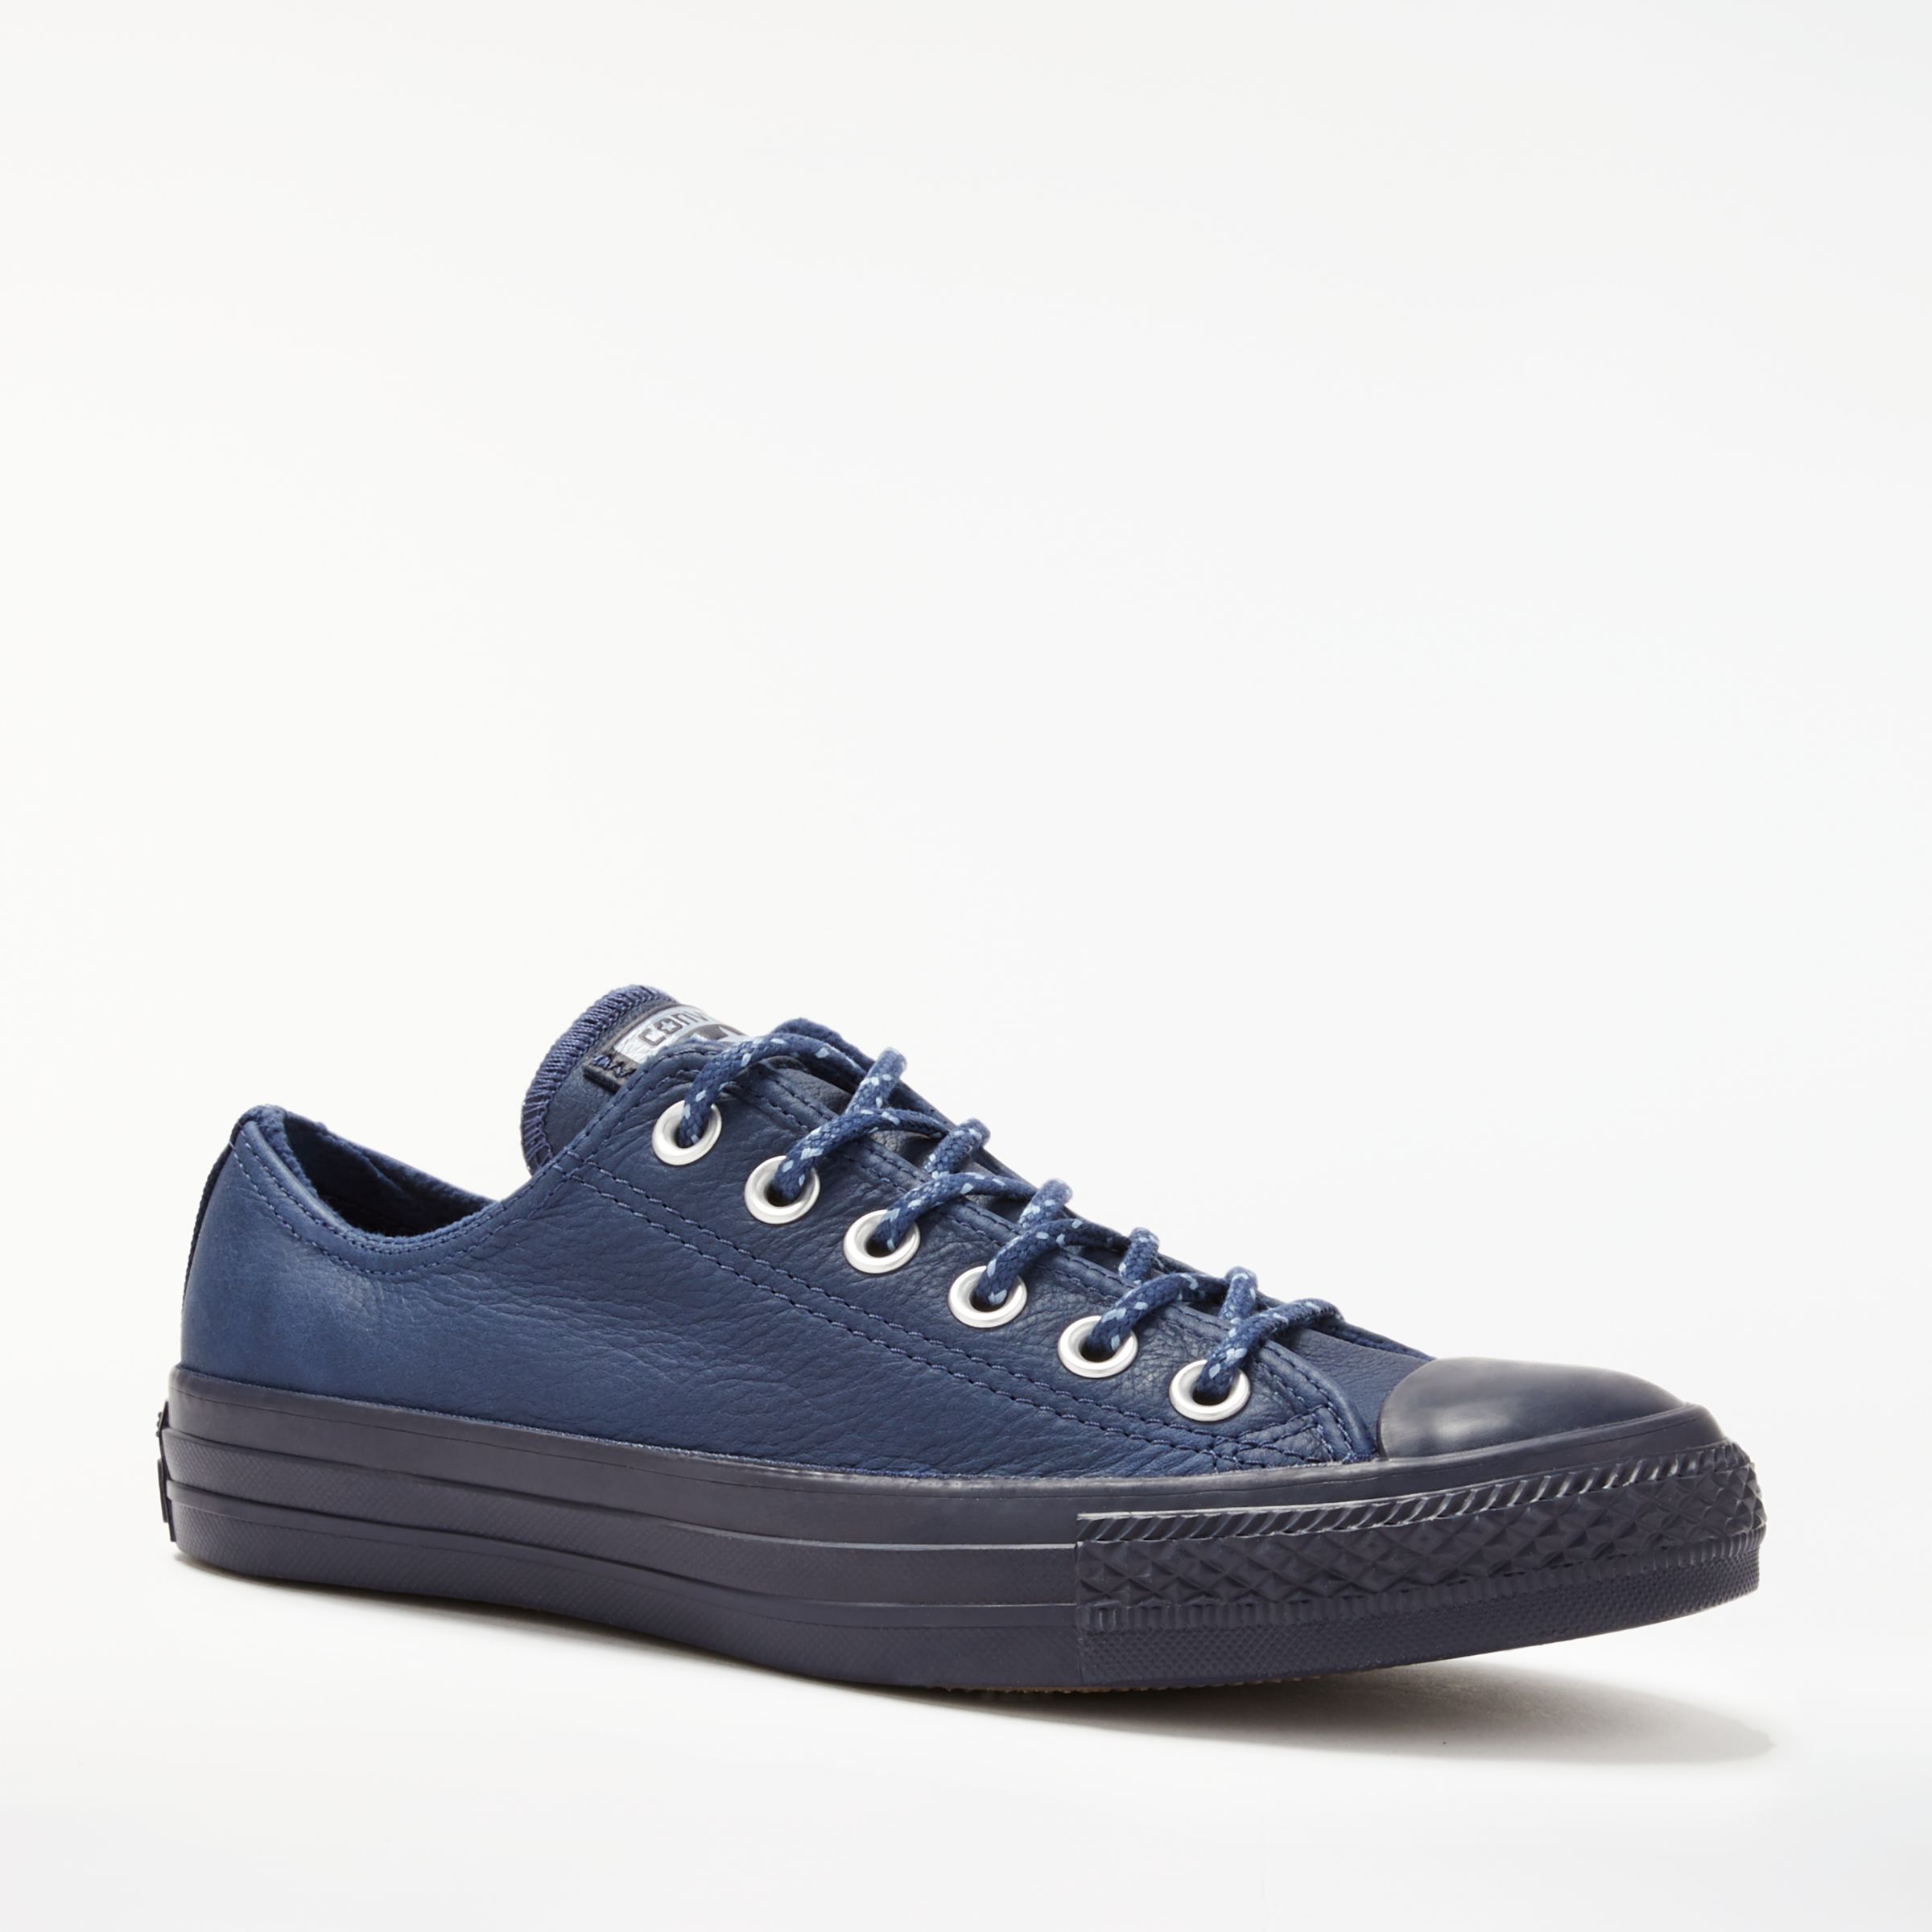 Converse Chuck Taylor All Star Ox Leather Trainers, Navy Leather